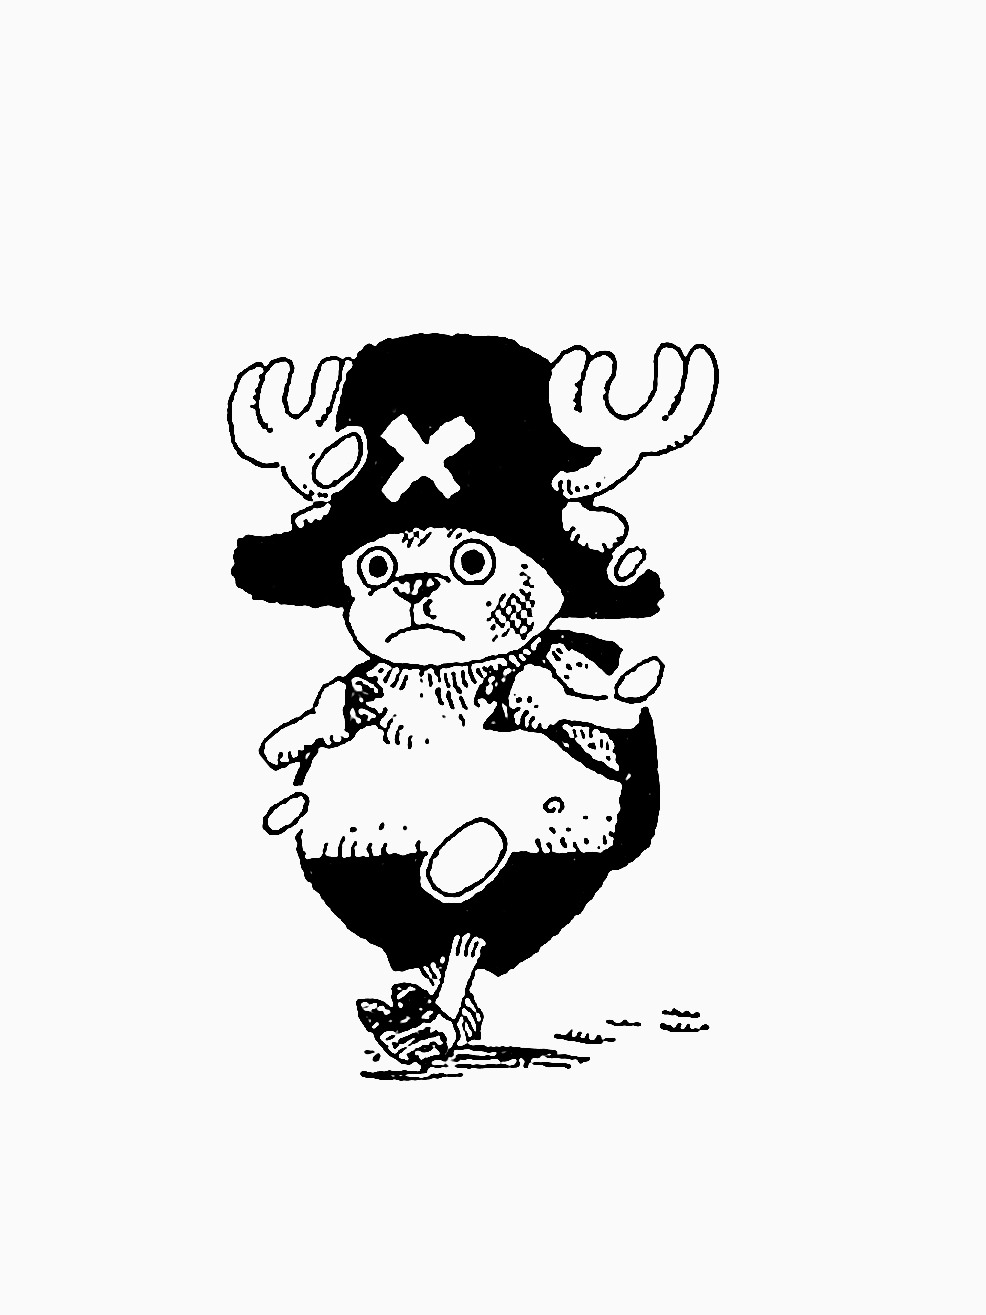 1k My Edits Mangacaps One Piece Tony Tony Chopper One Piece 595 Opgraphics Op Manga One Piece 725 Until 7 He Just Keeps Getting Cuter Tbh One Piece 143 One Piece